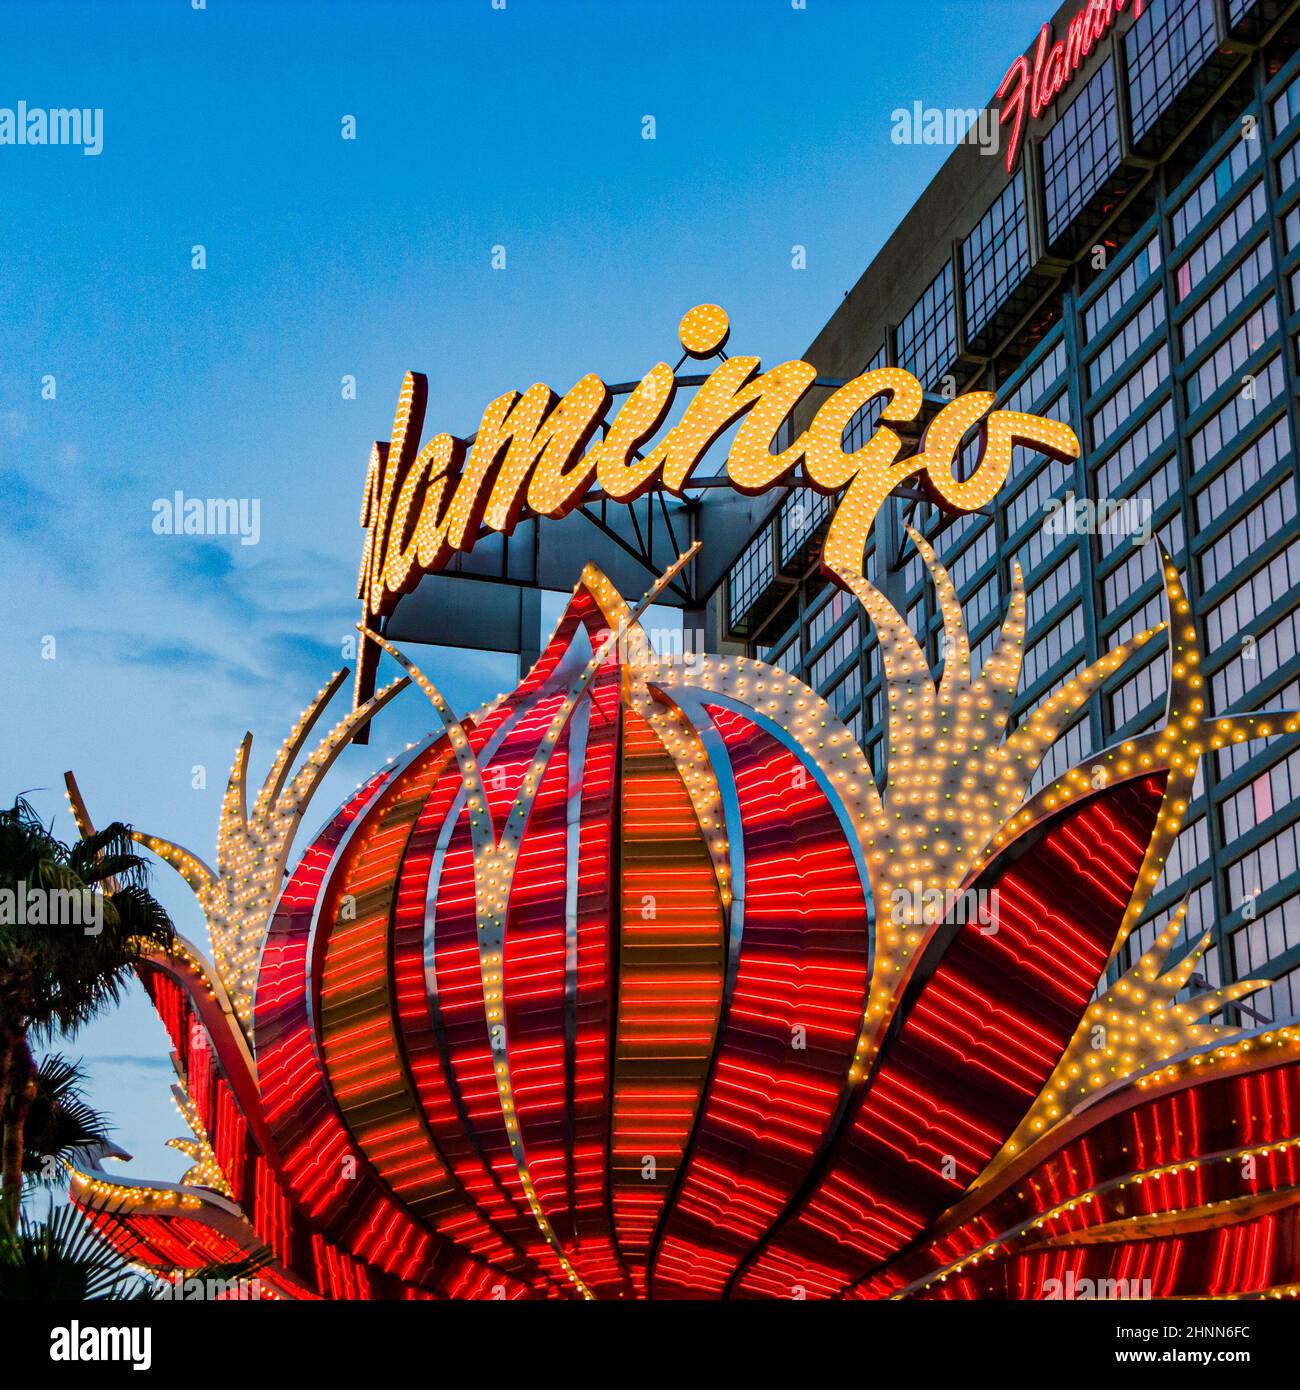 Flamingo hotel and gambling place on the Las Vegas Strip in the late afternoon in neon light in Las Vegas, USA Stock Photo